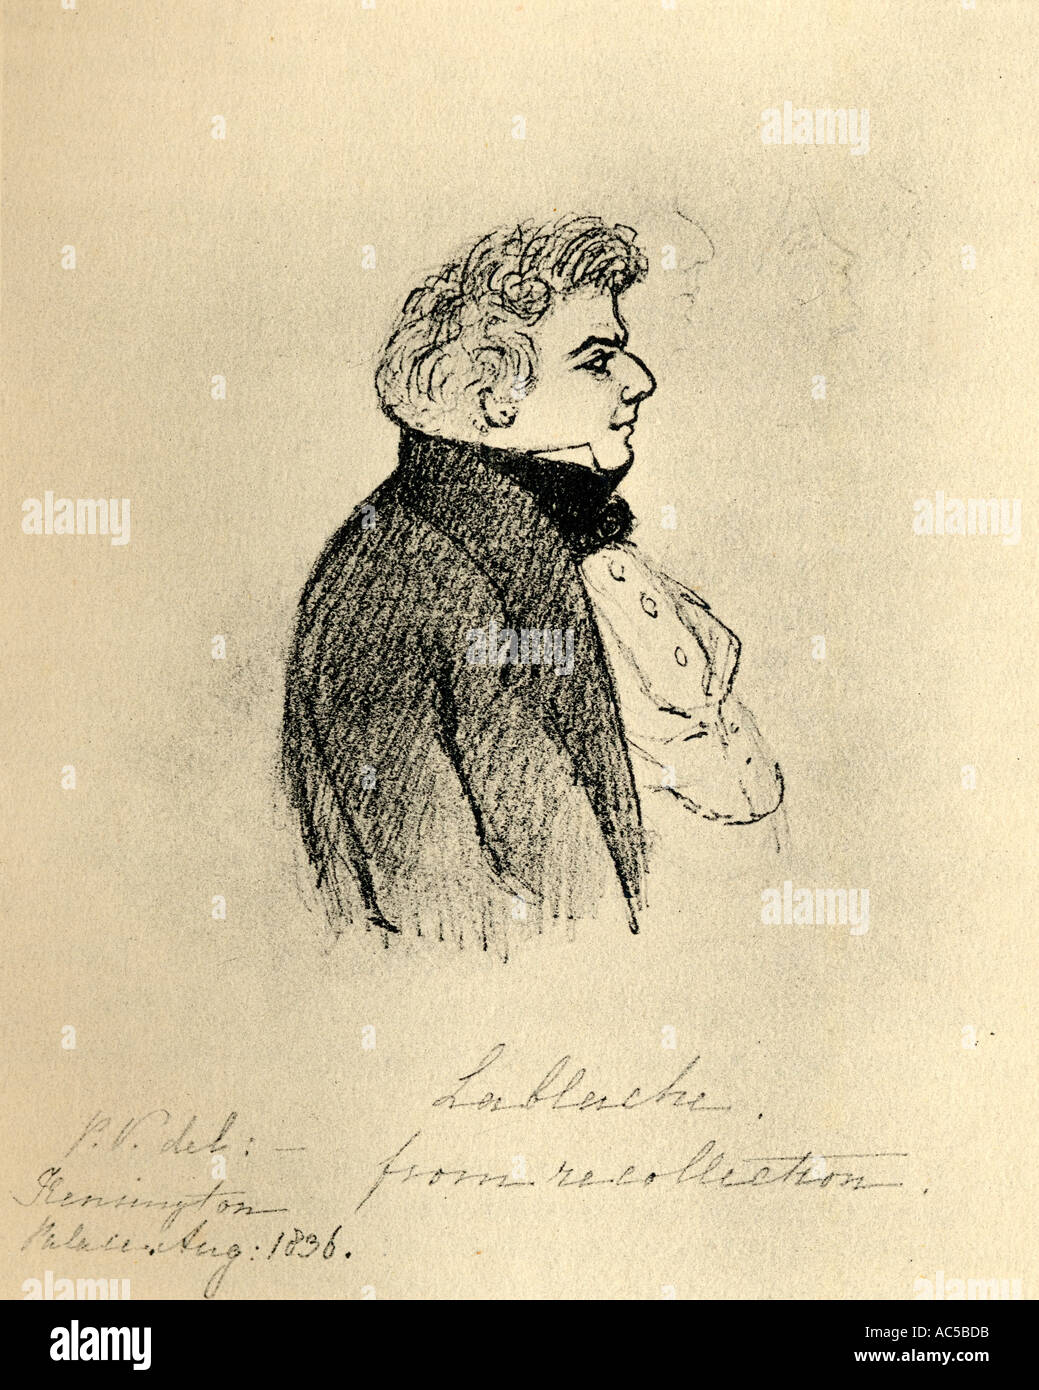 Luigi Lablache, 1794 - 1858, French opera Singer. From a sketch by Princess Victoria Stock Photo